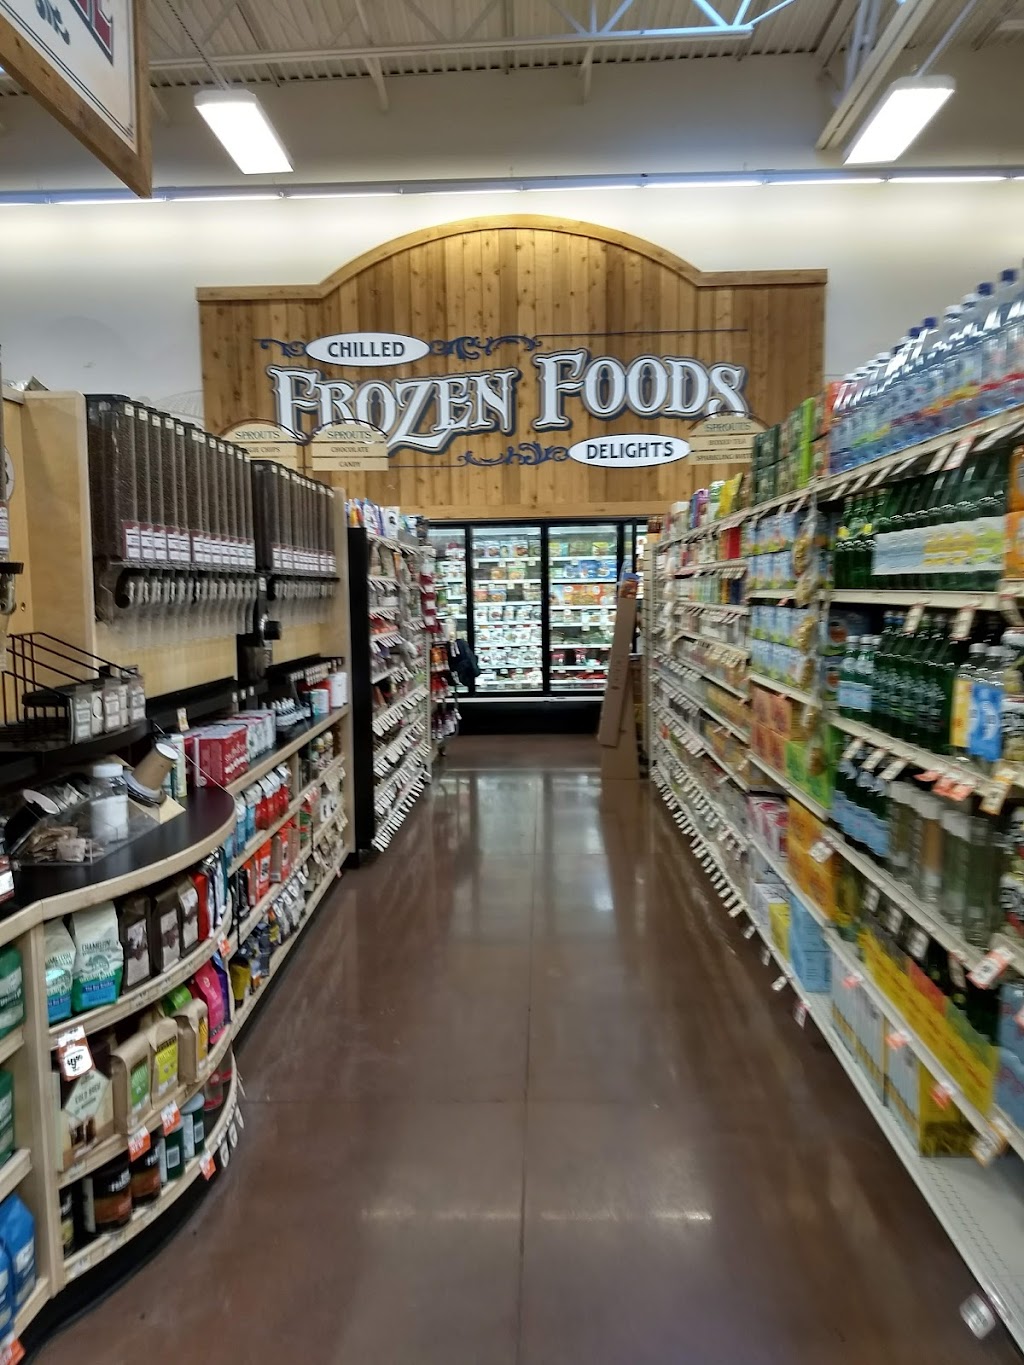 Sprouts Farmers Market | 8383 N Booth Ave, Kansas City, MO 64158, USA | Phone: (816) 222-0202